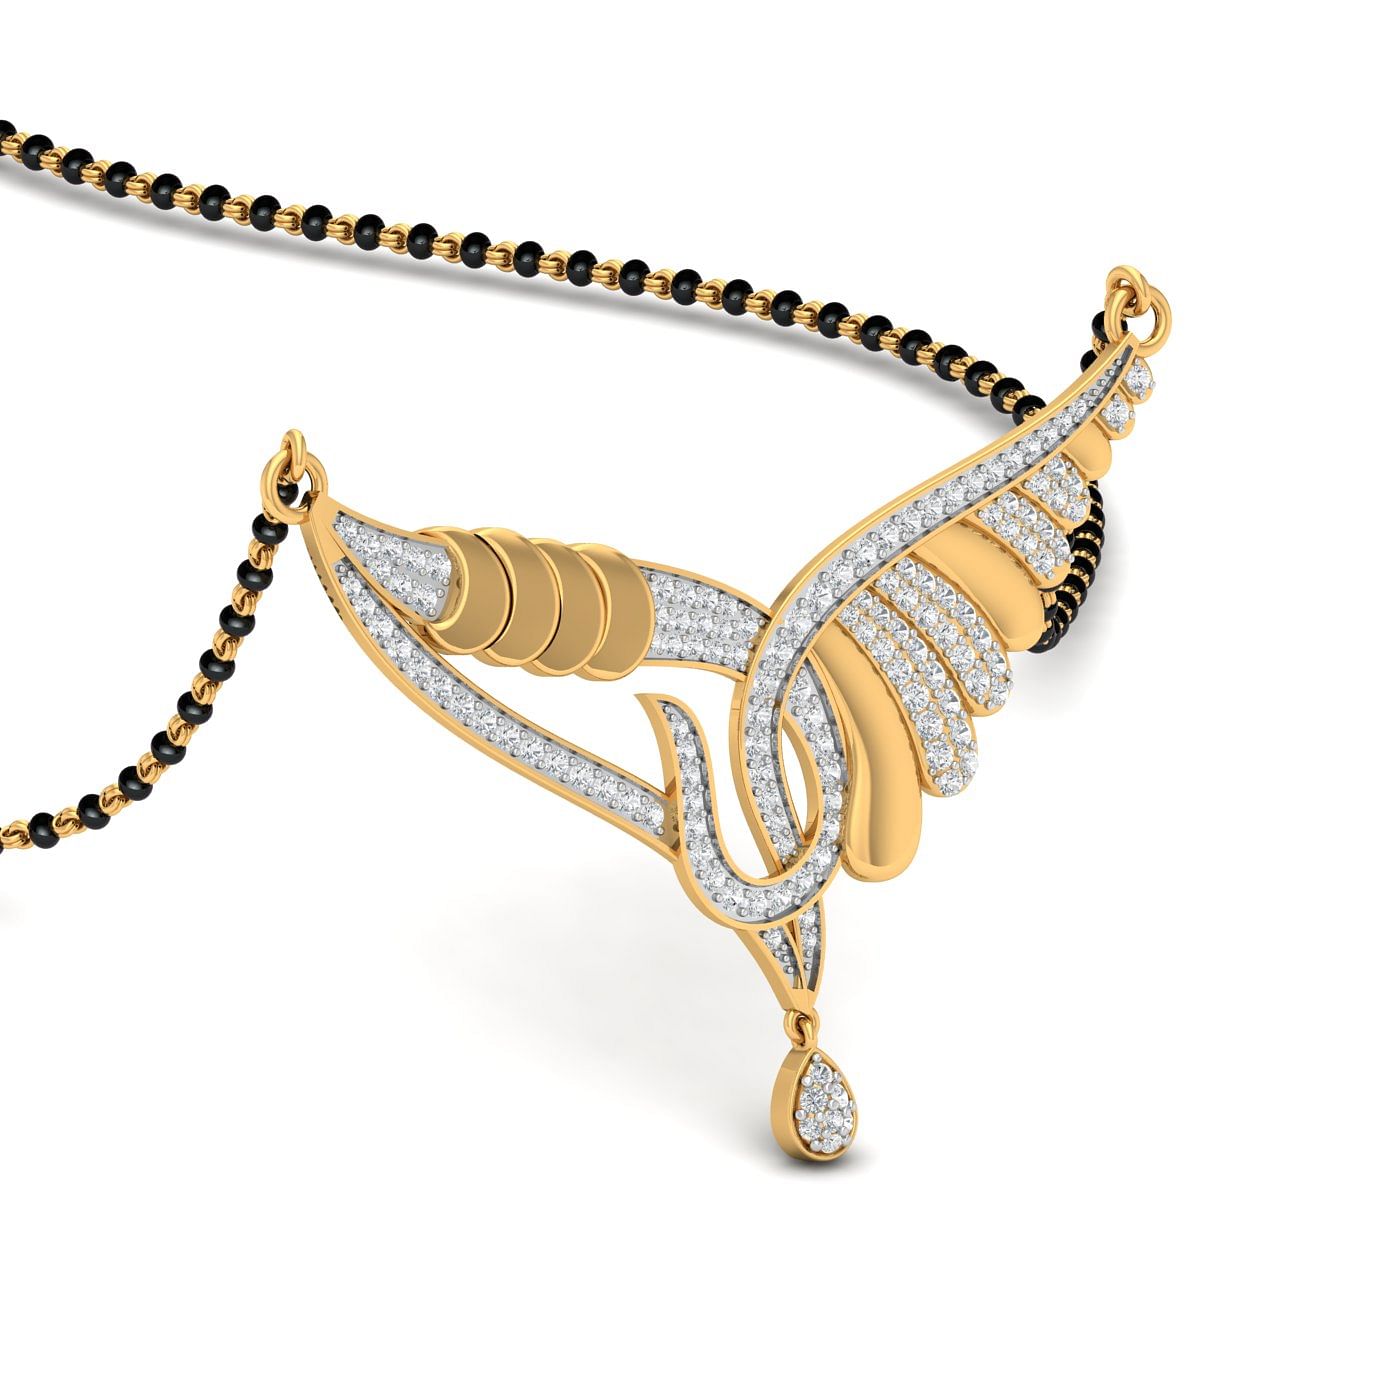 Hetal gold and diamond mangalsutra with yellow gold bridal